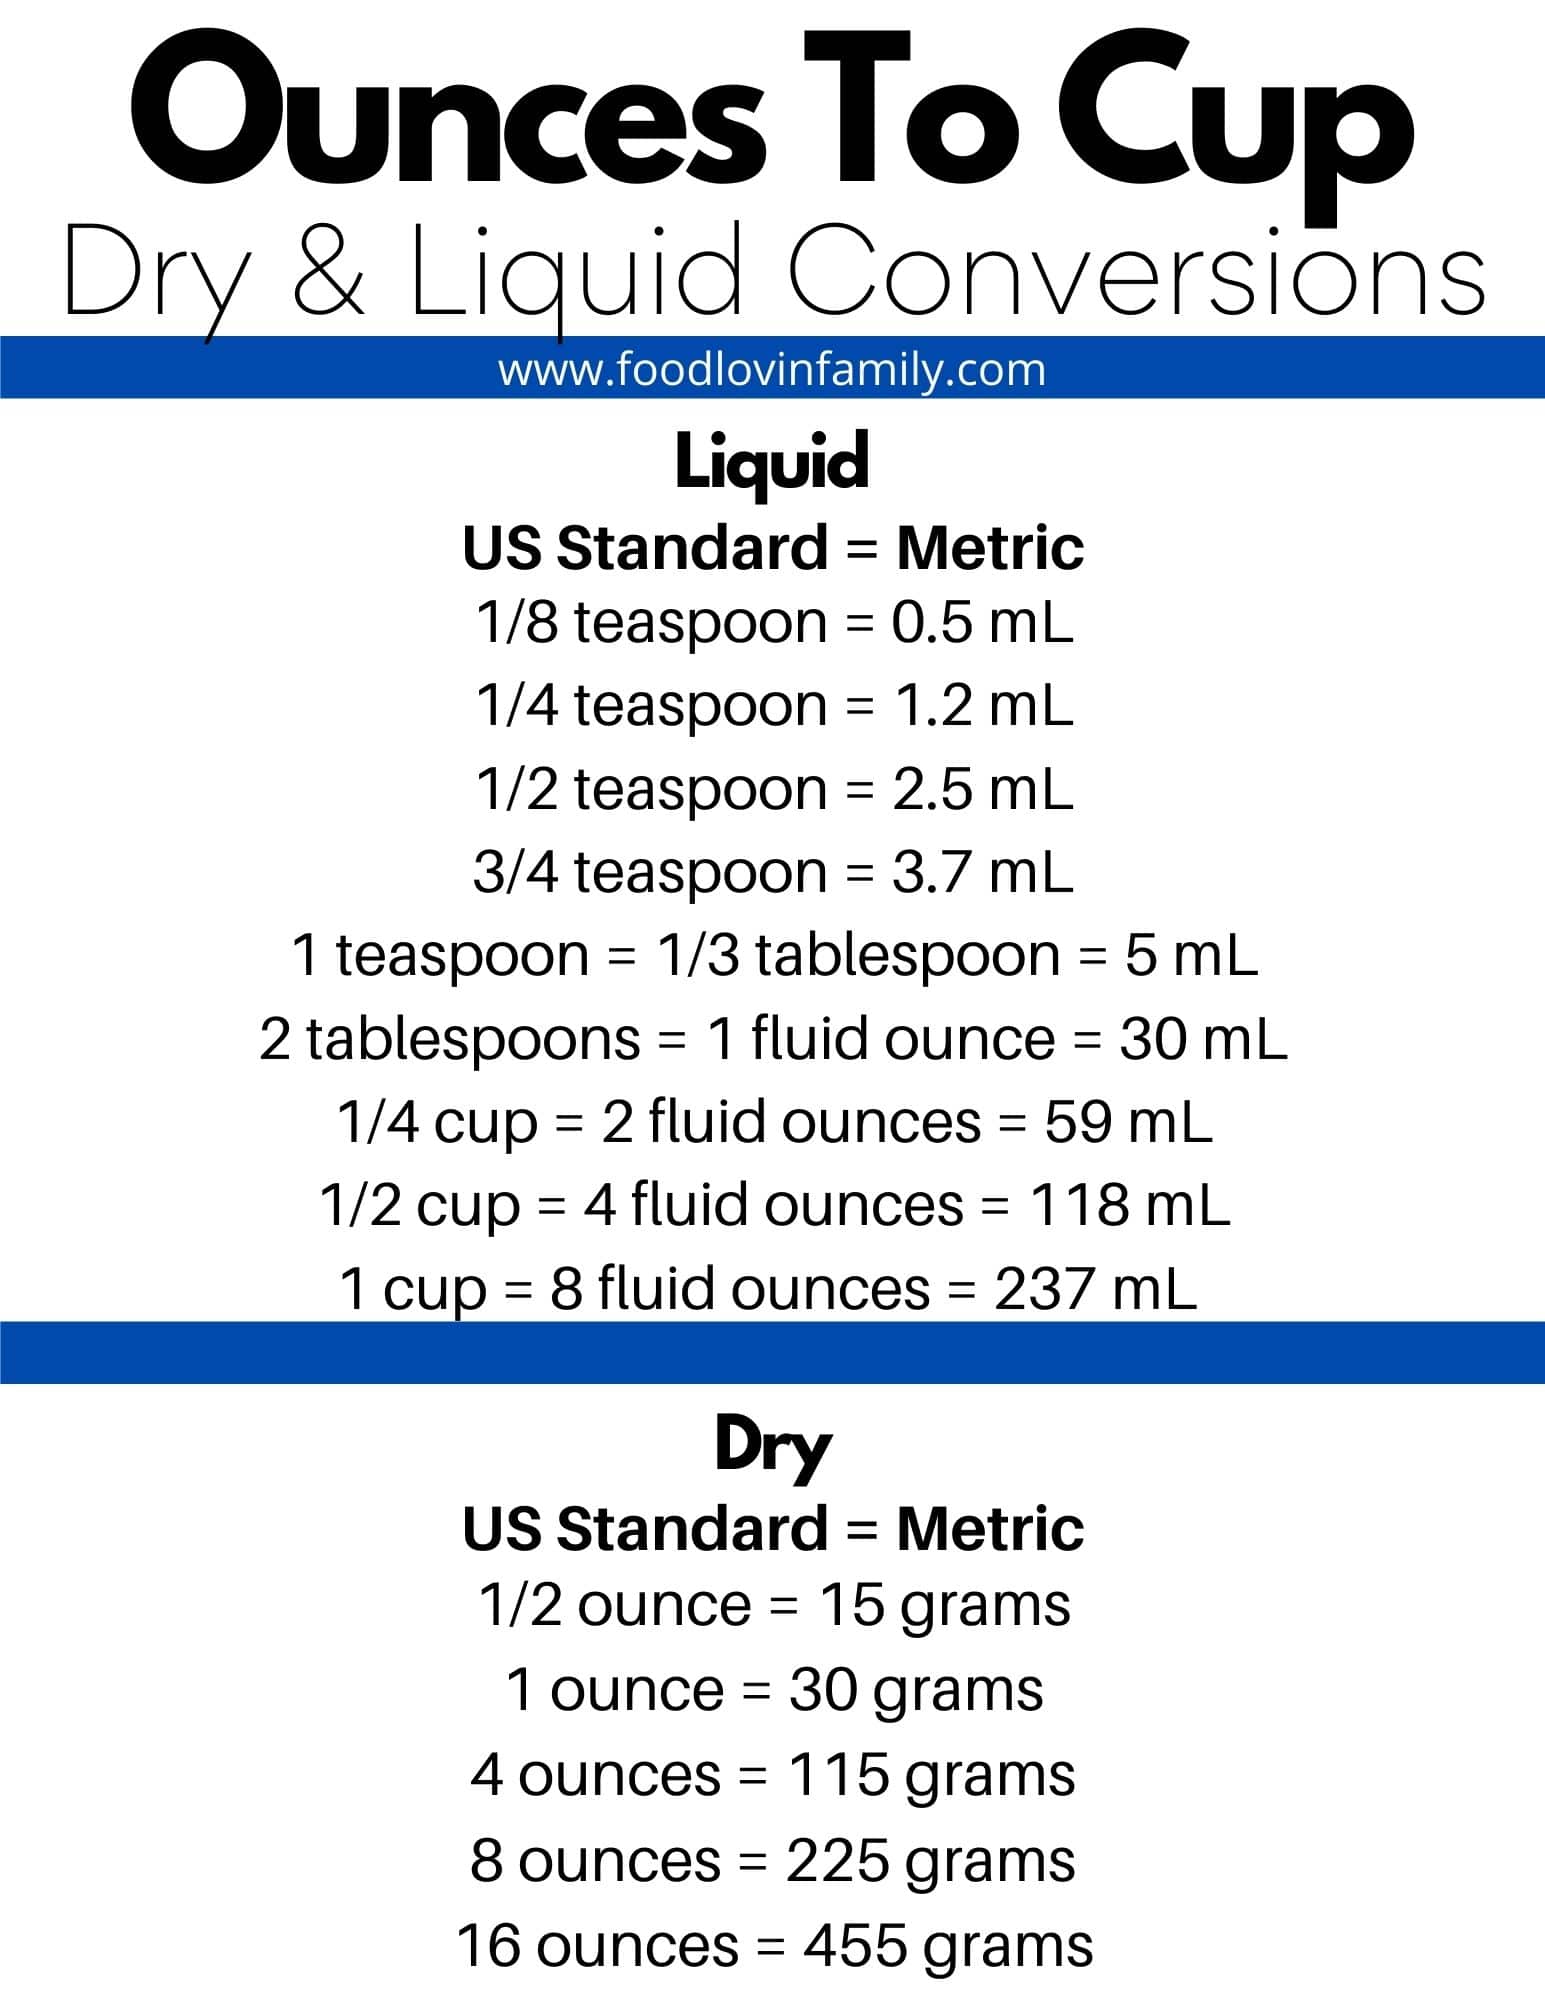 How Many Ounces In A Cup: Liquid and Dry Conversions